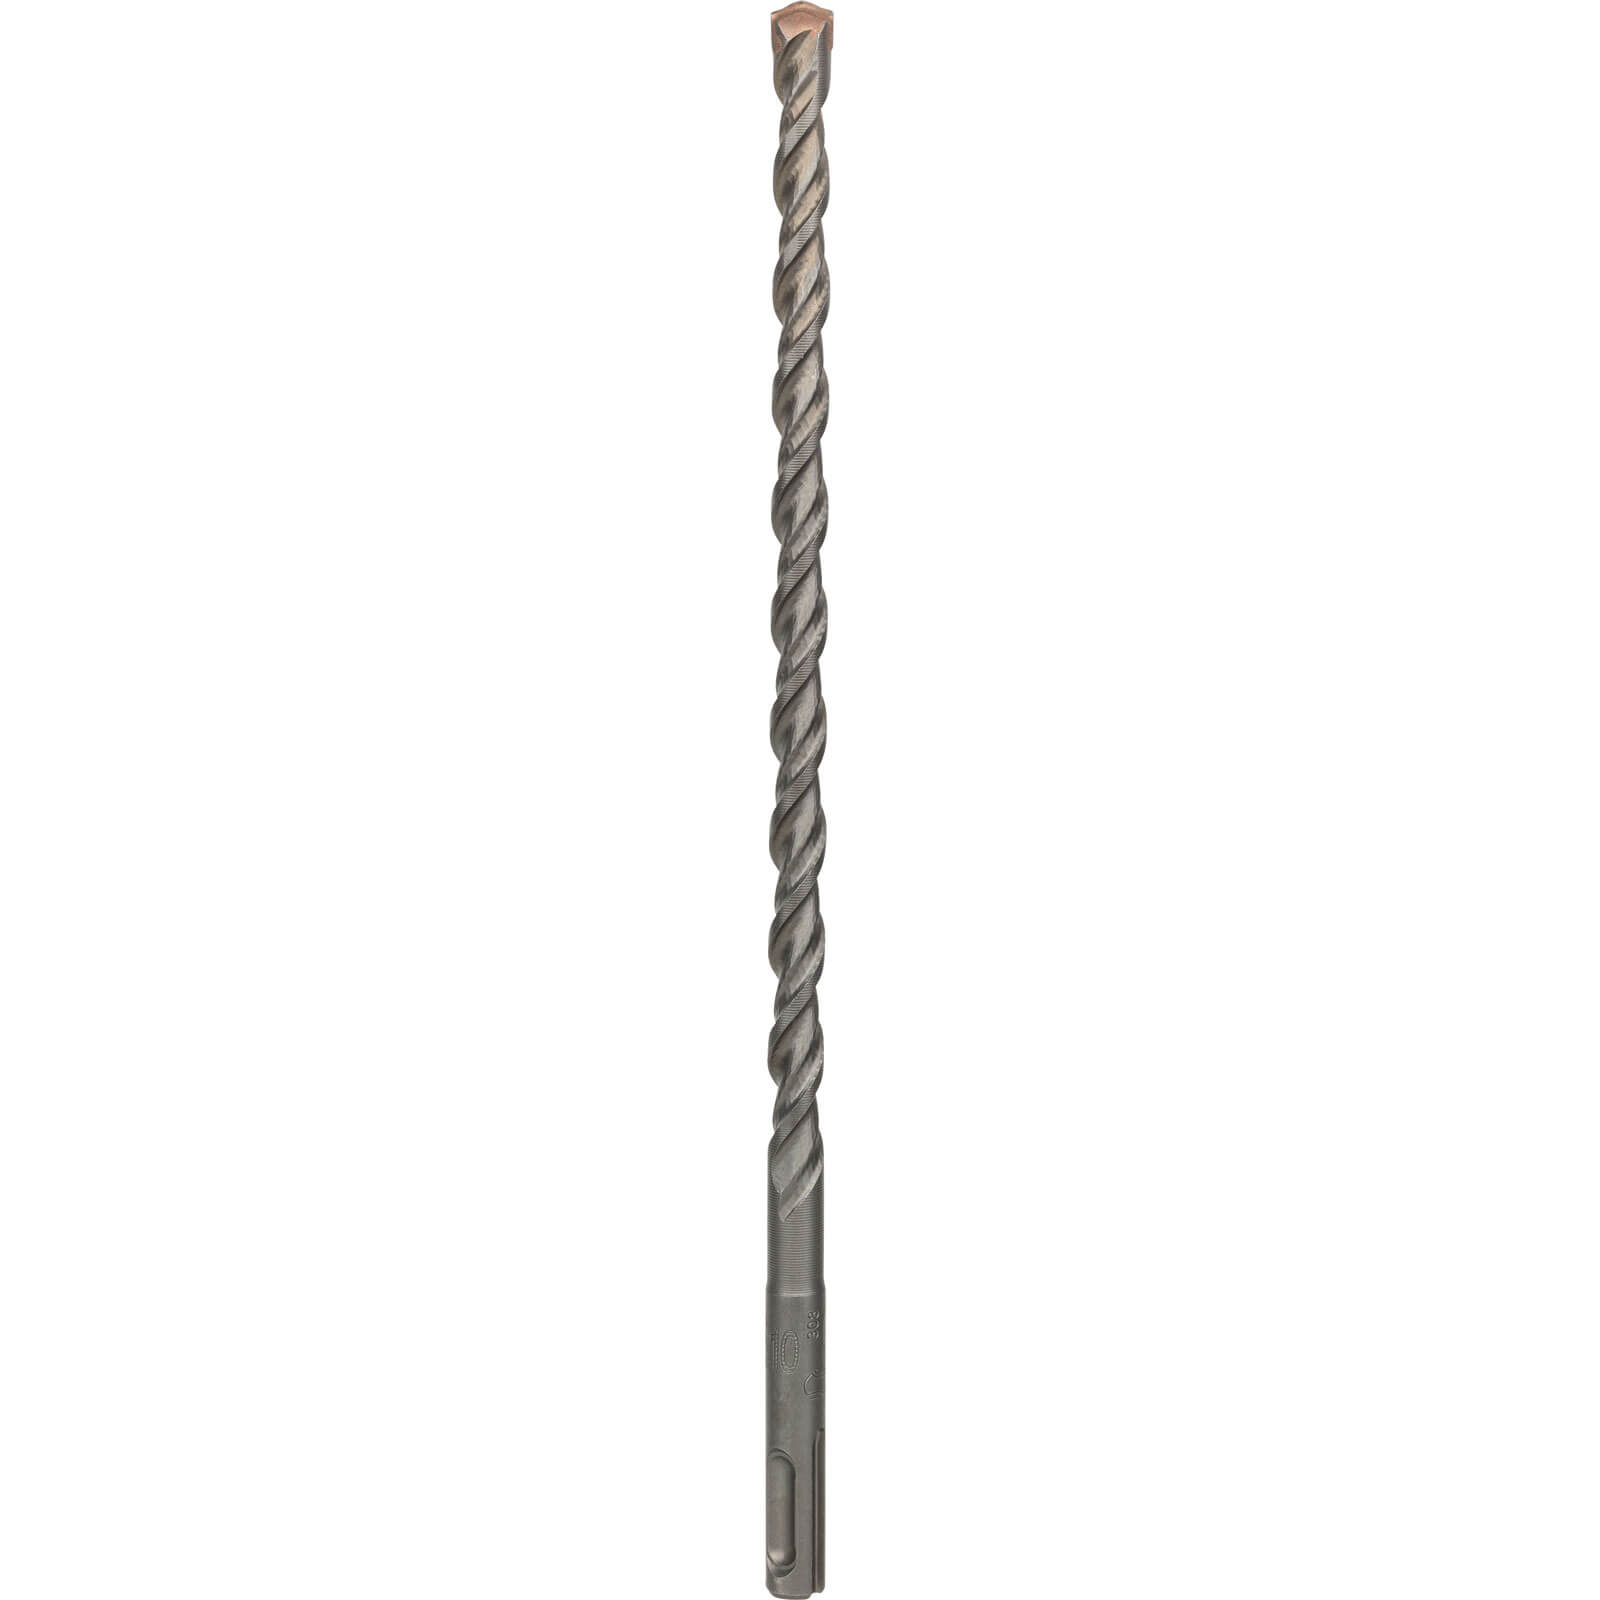 Image of Bosch Series 3 SDS Plus Masonry Drill Bit 10mm 260mm Pack of 1